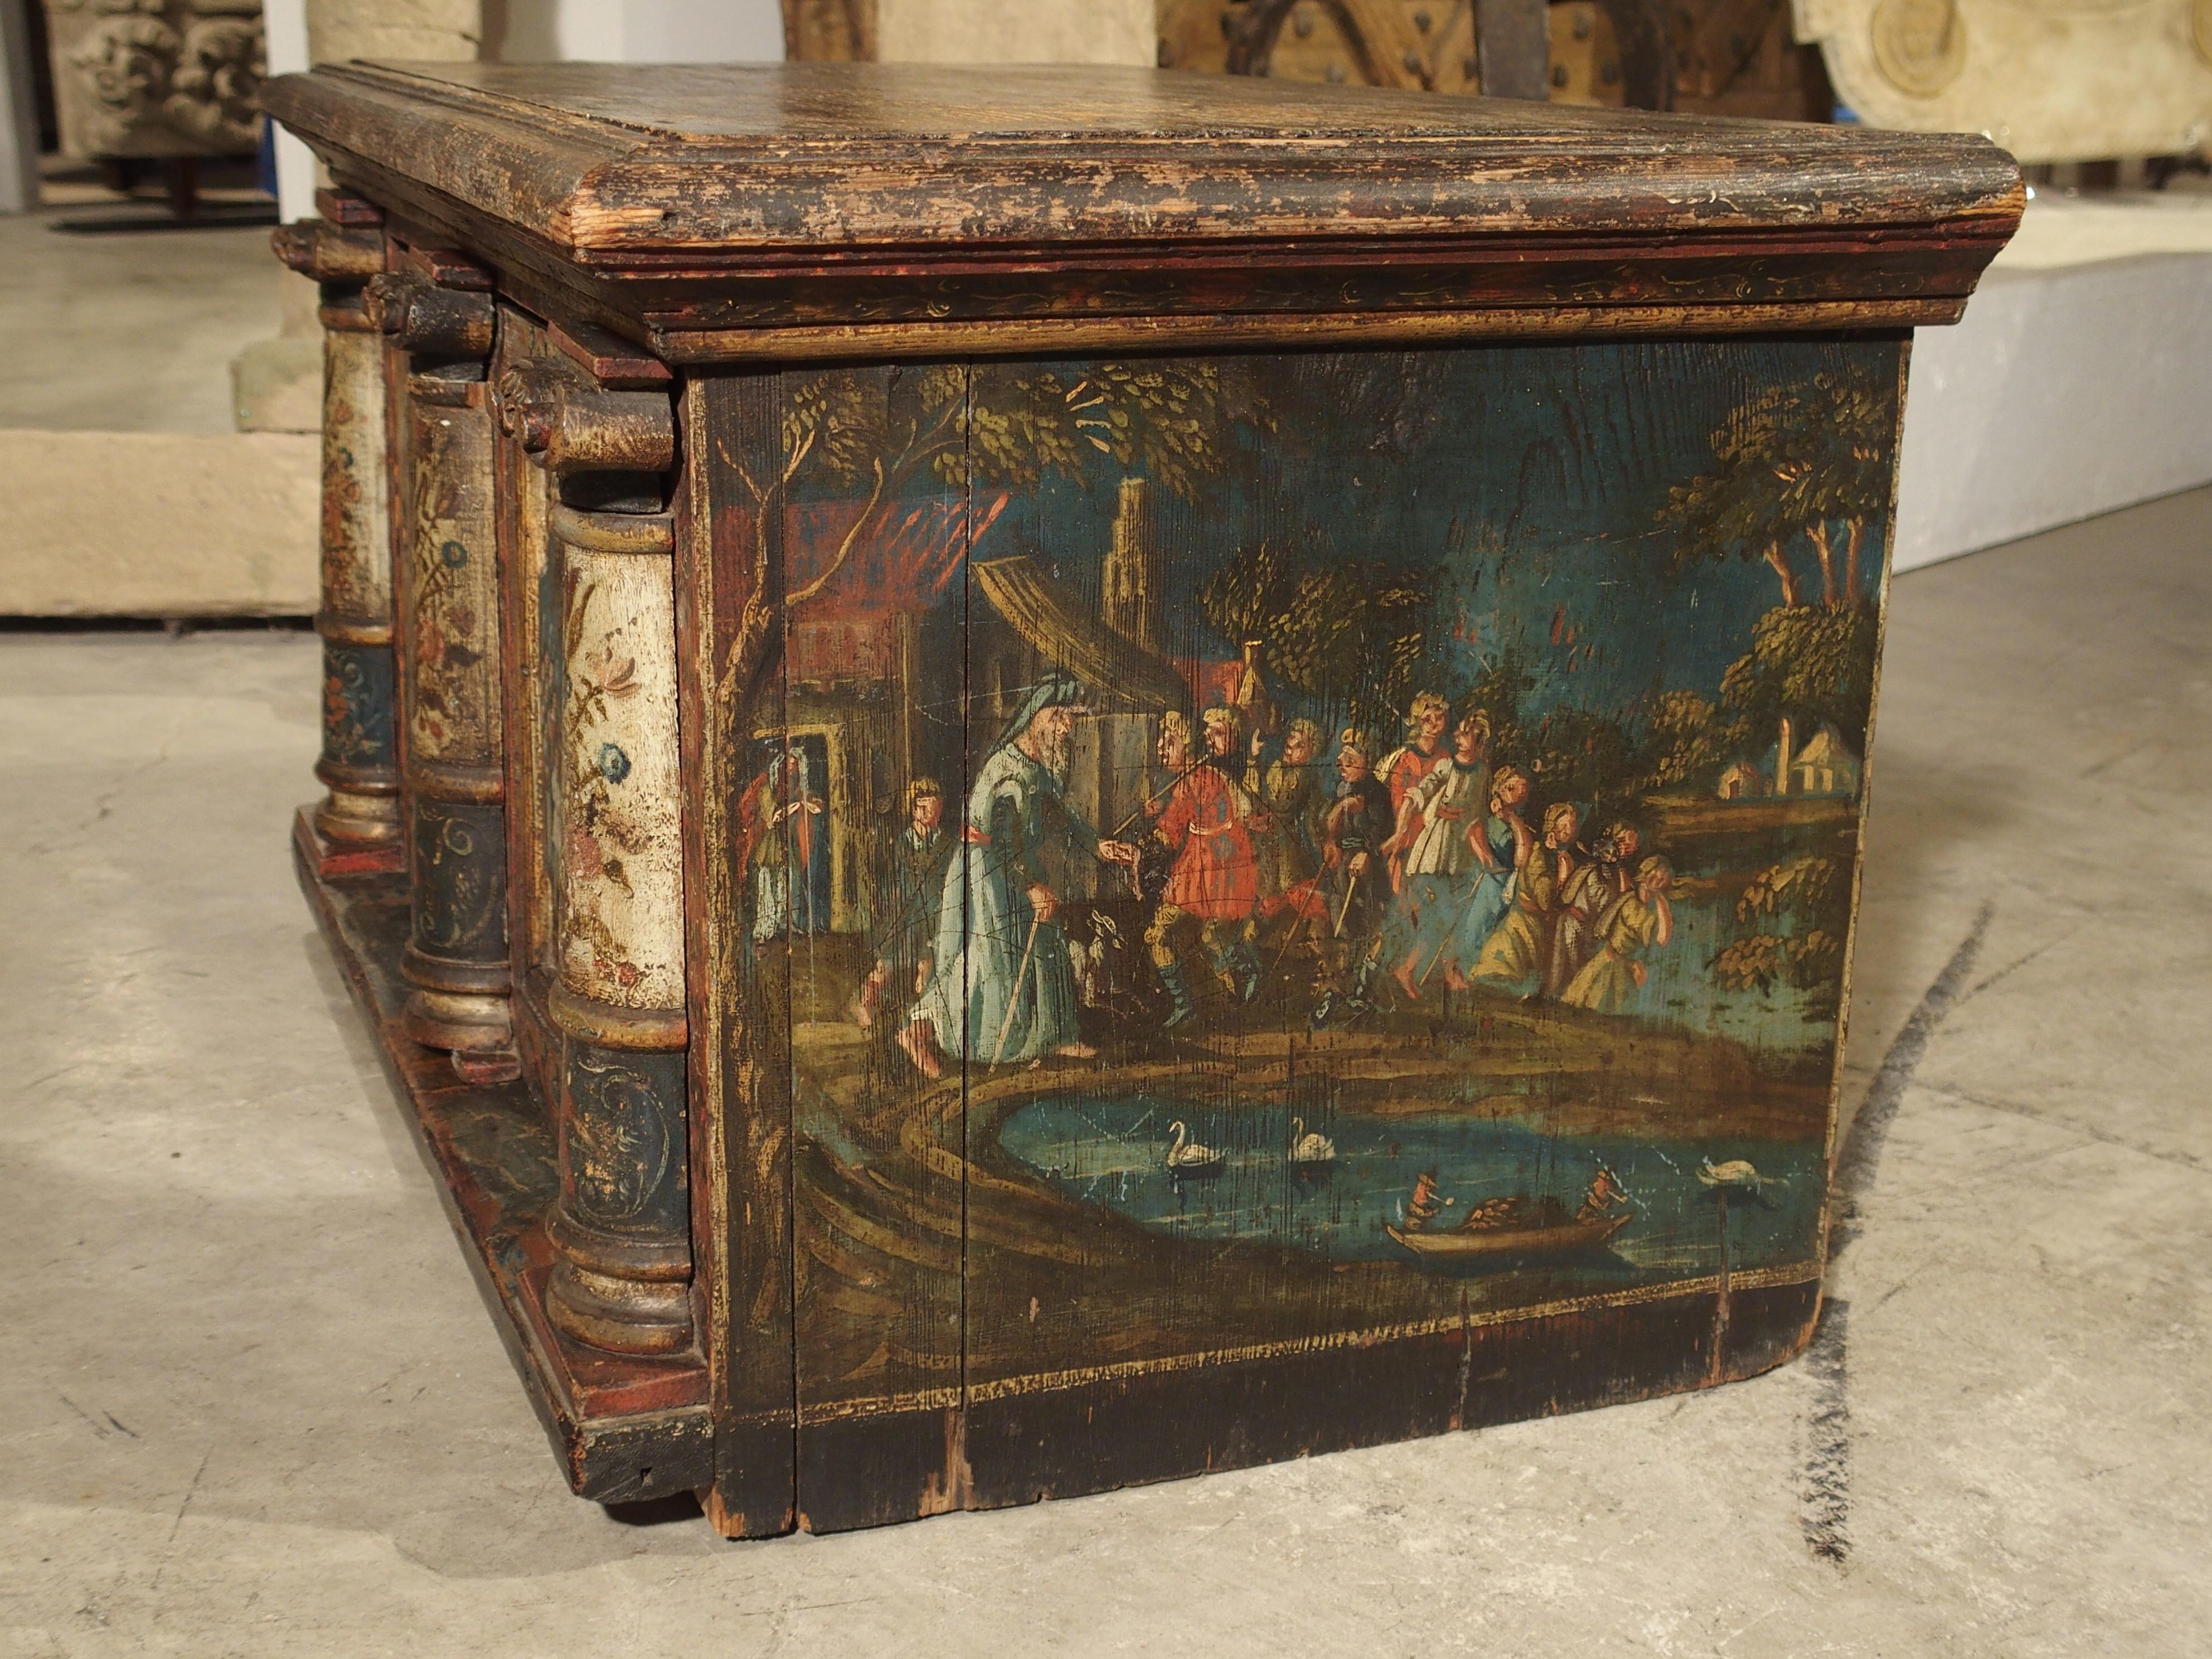 This rare and colorful pine wood table cabinet from Southern Germany dates to the 1700s or quite possibly older. Pieces of this type that survive today can date back to the 14th century. This piece has a front opening door with three pilasters